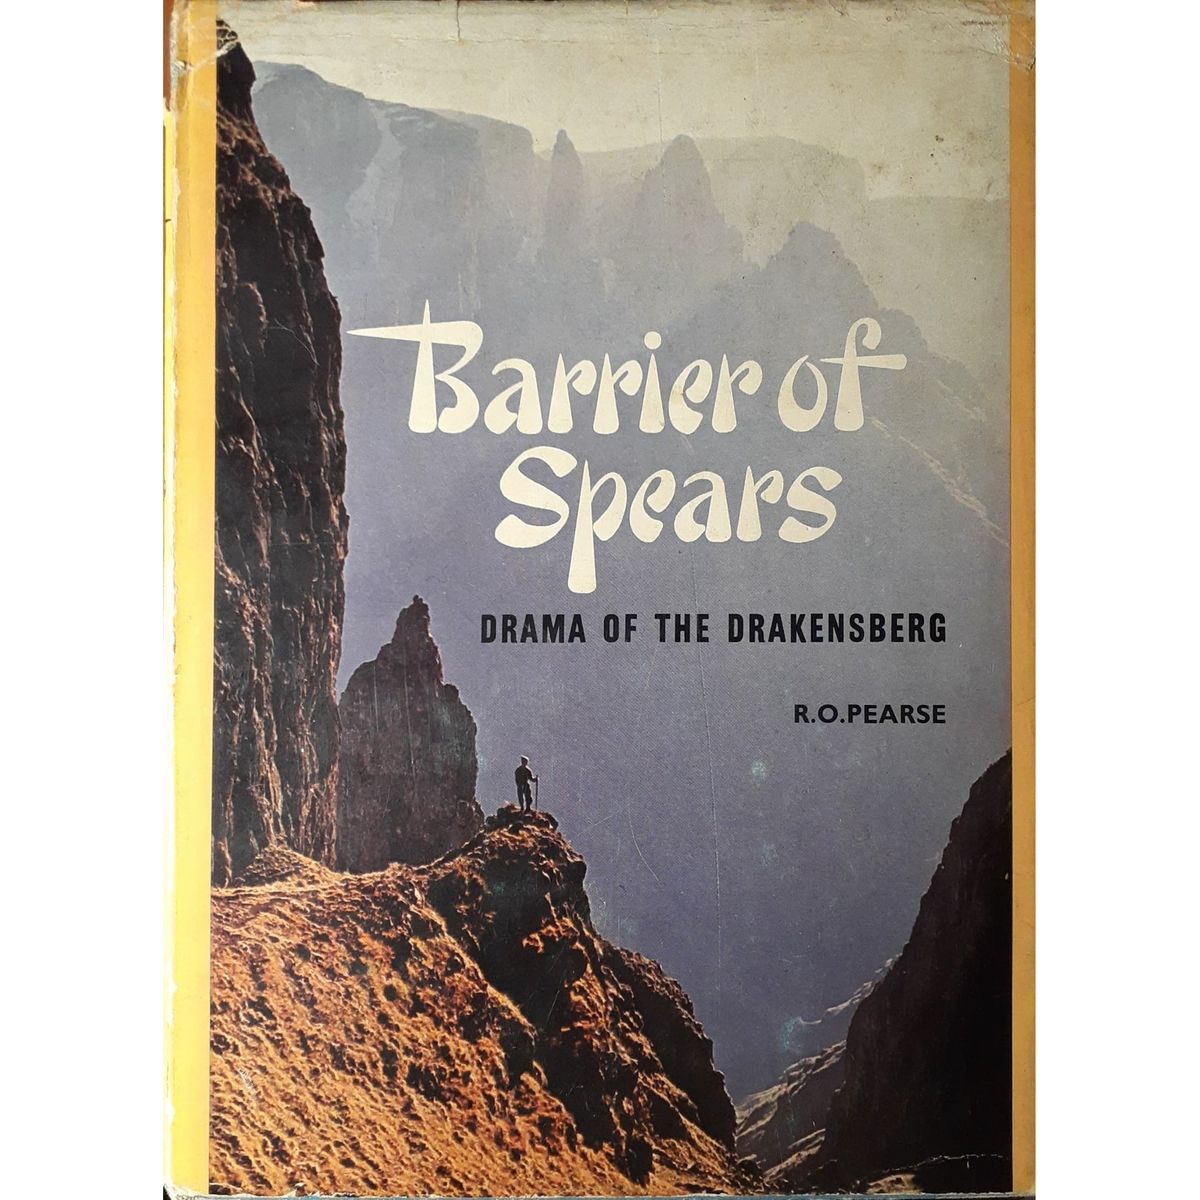 ISBN: 9780869780503 / 0869780506 - Barrier of Spears: Drama of the Drakensberg by R.O. Pearse [1973]